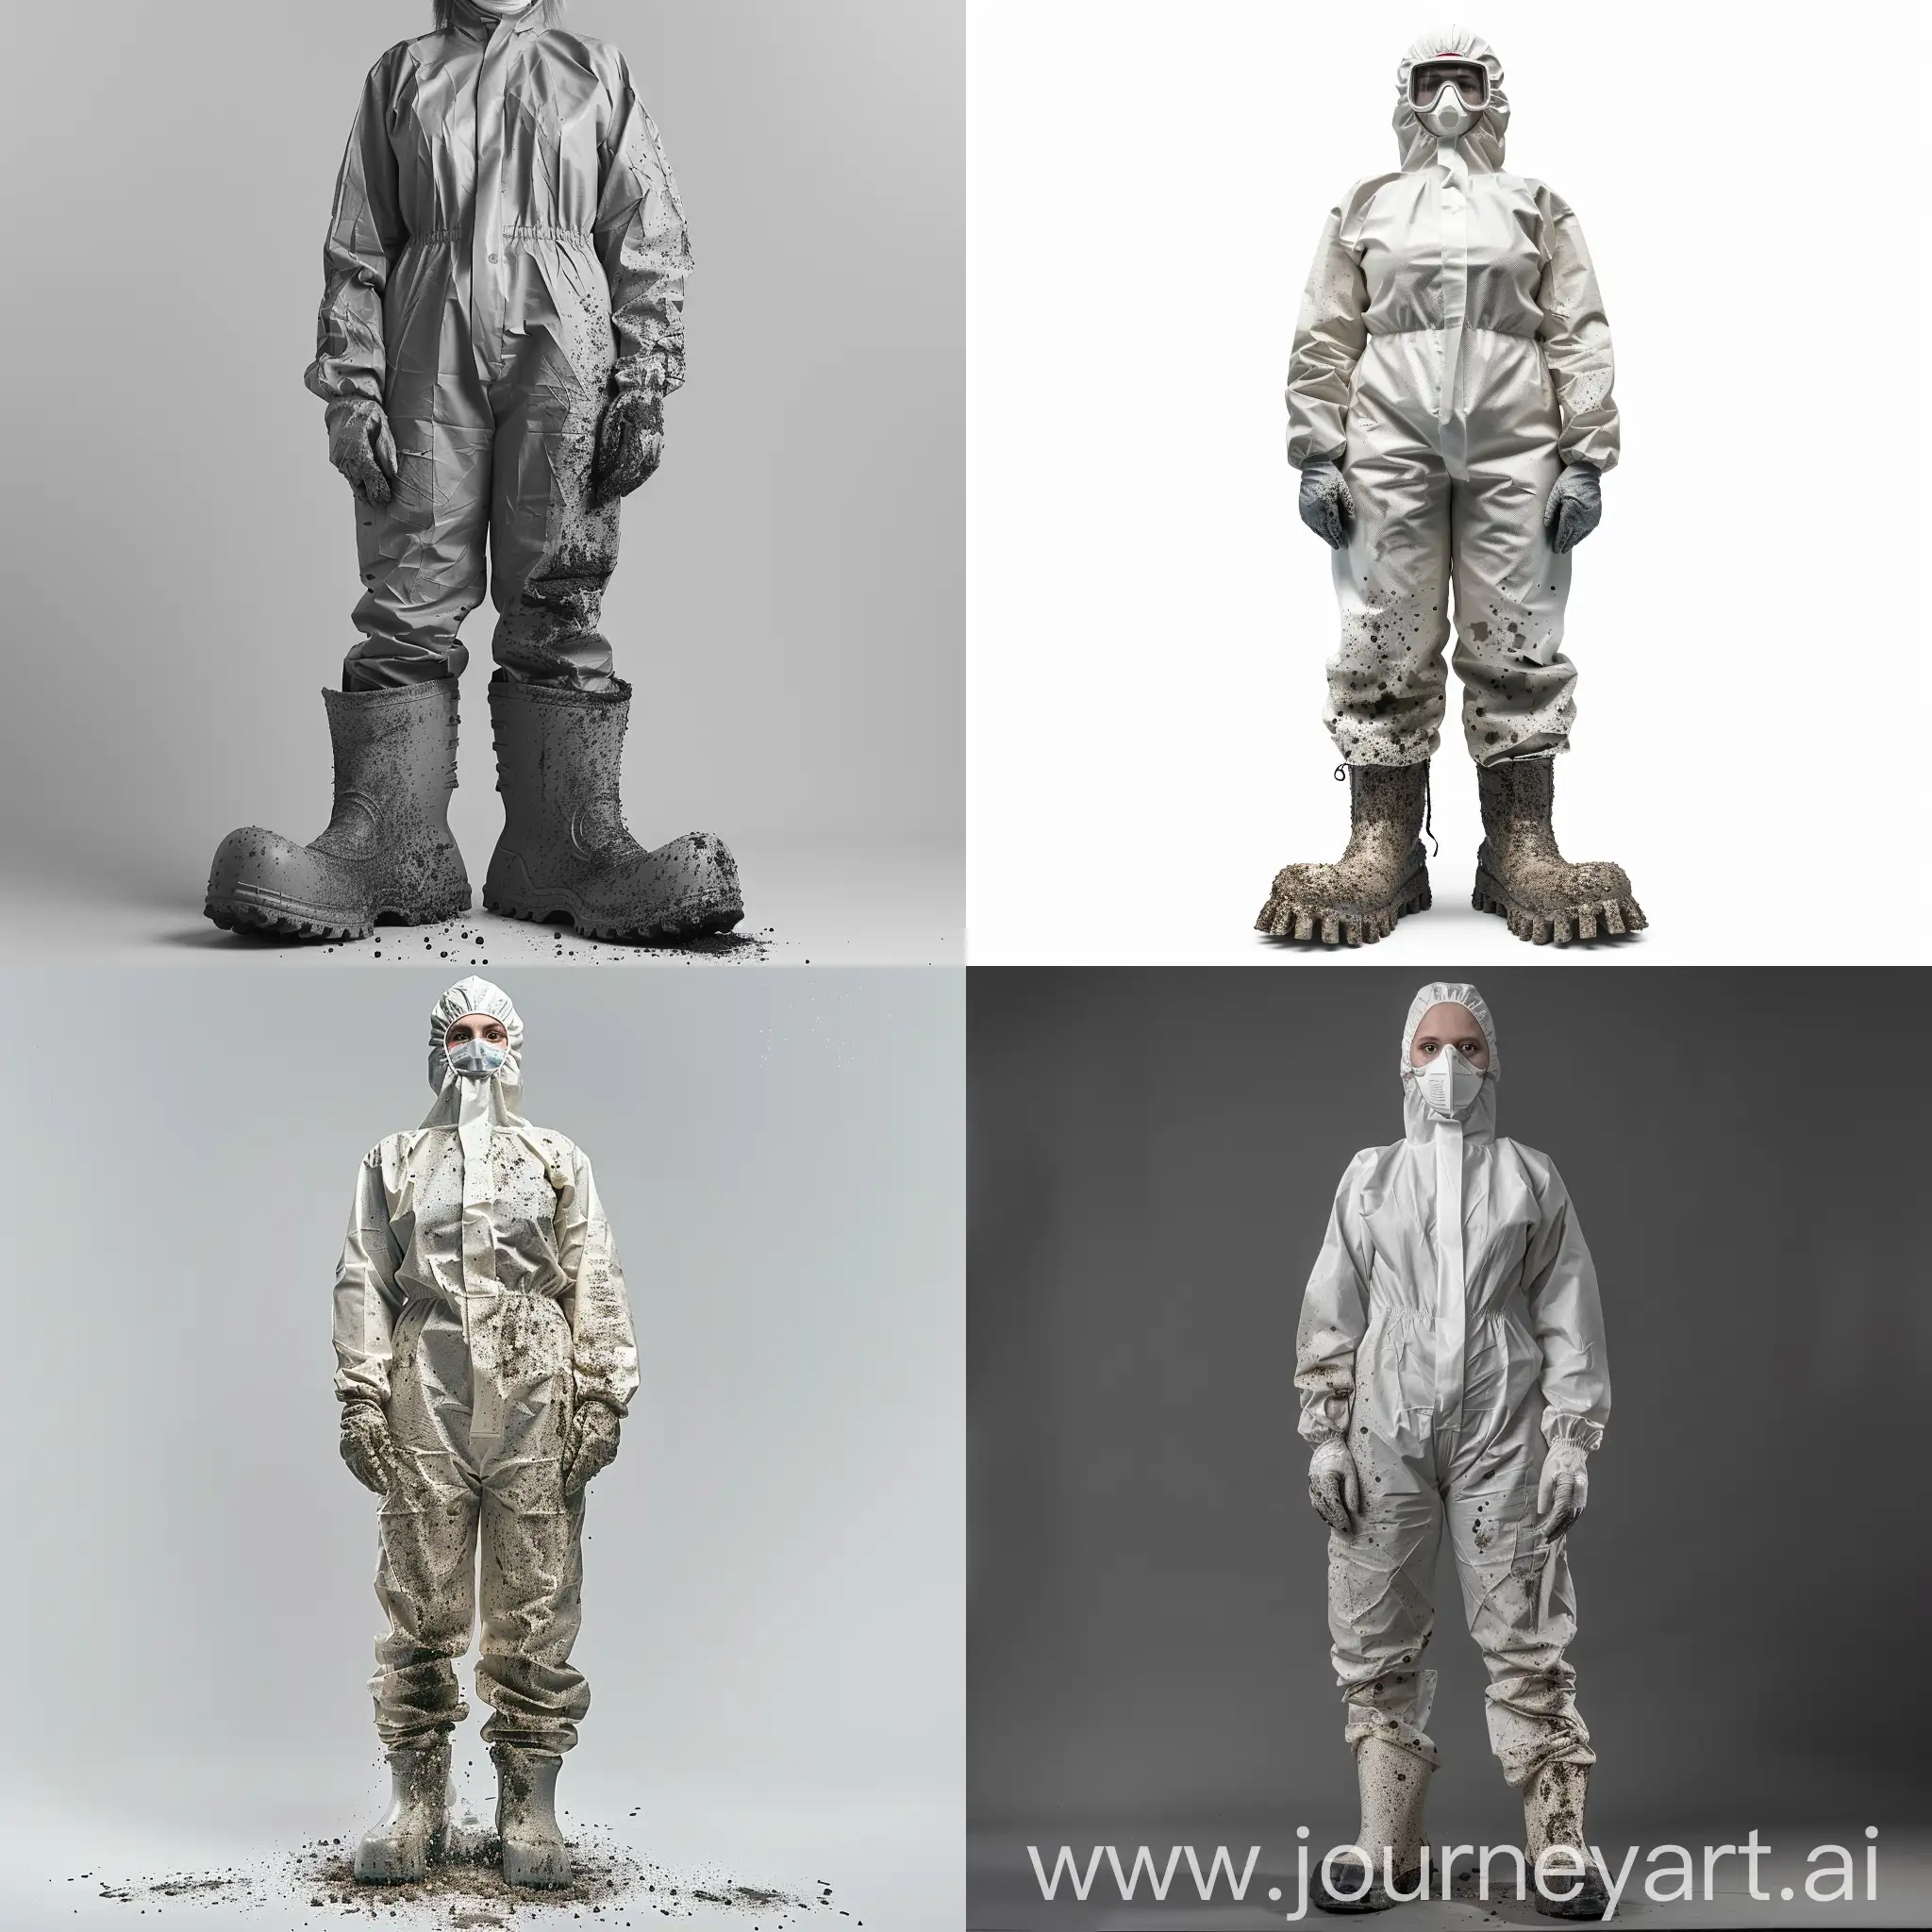 woman, tight hazmat suit, protective gear, air isolated, fullbody, rubber, full face mask, rubber gloves, full-length photo, massive rubber shoes, drops of mud on suit, masculine pose